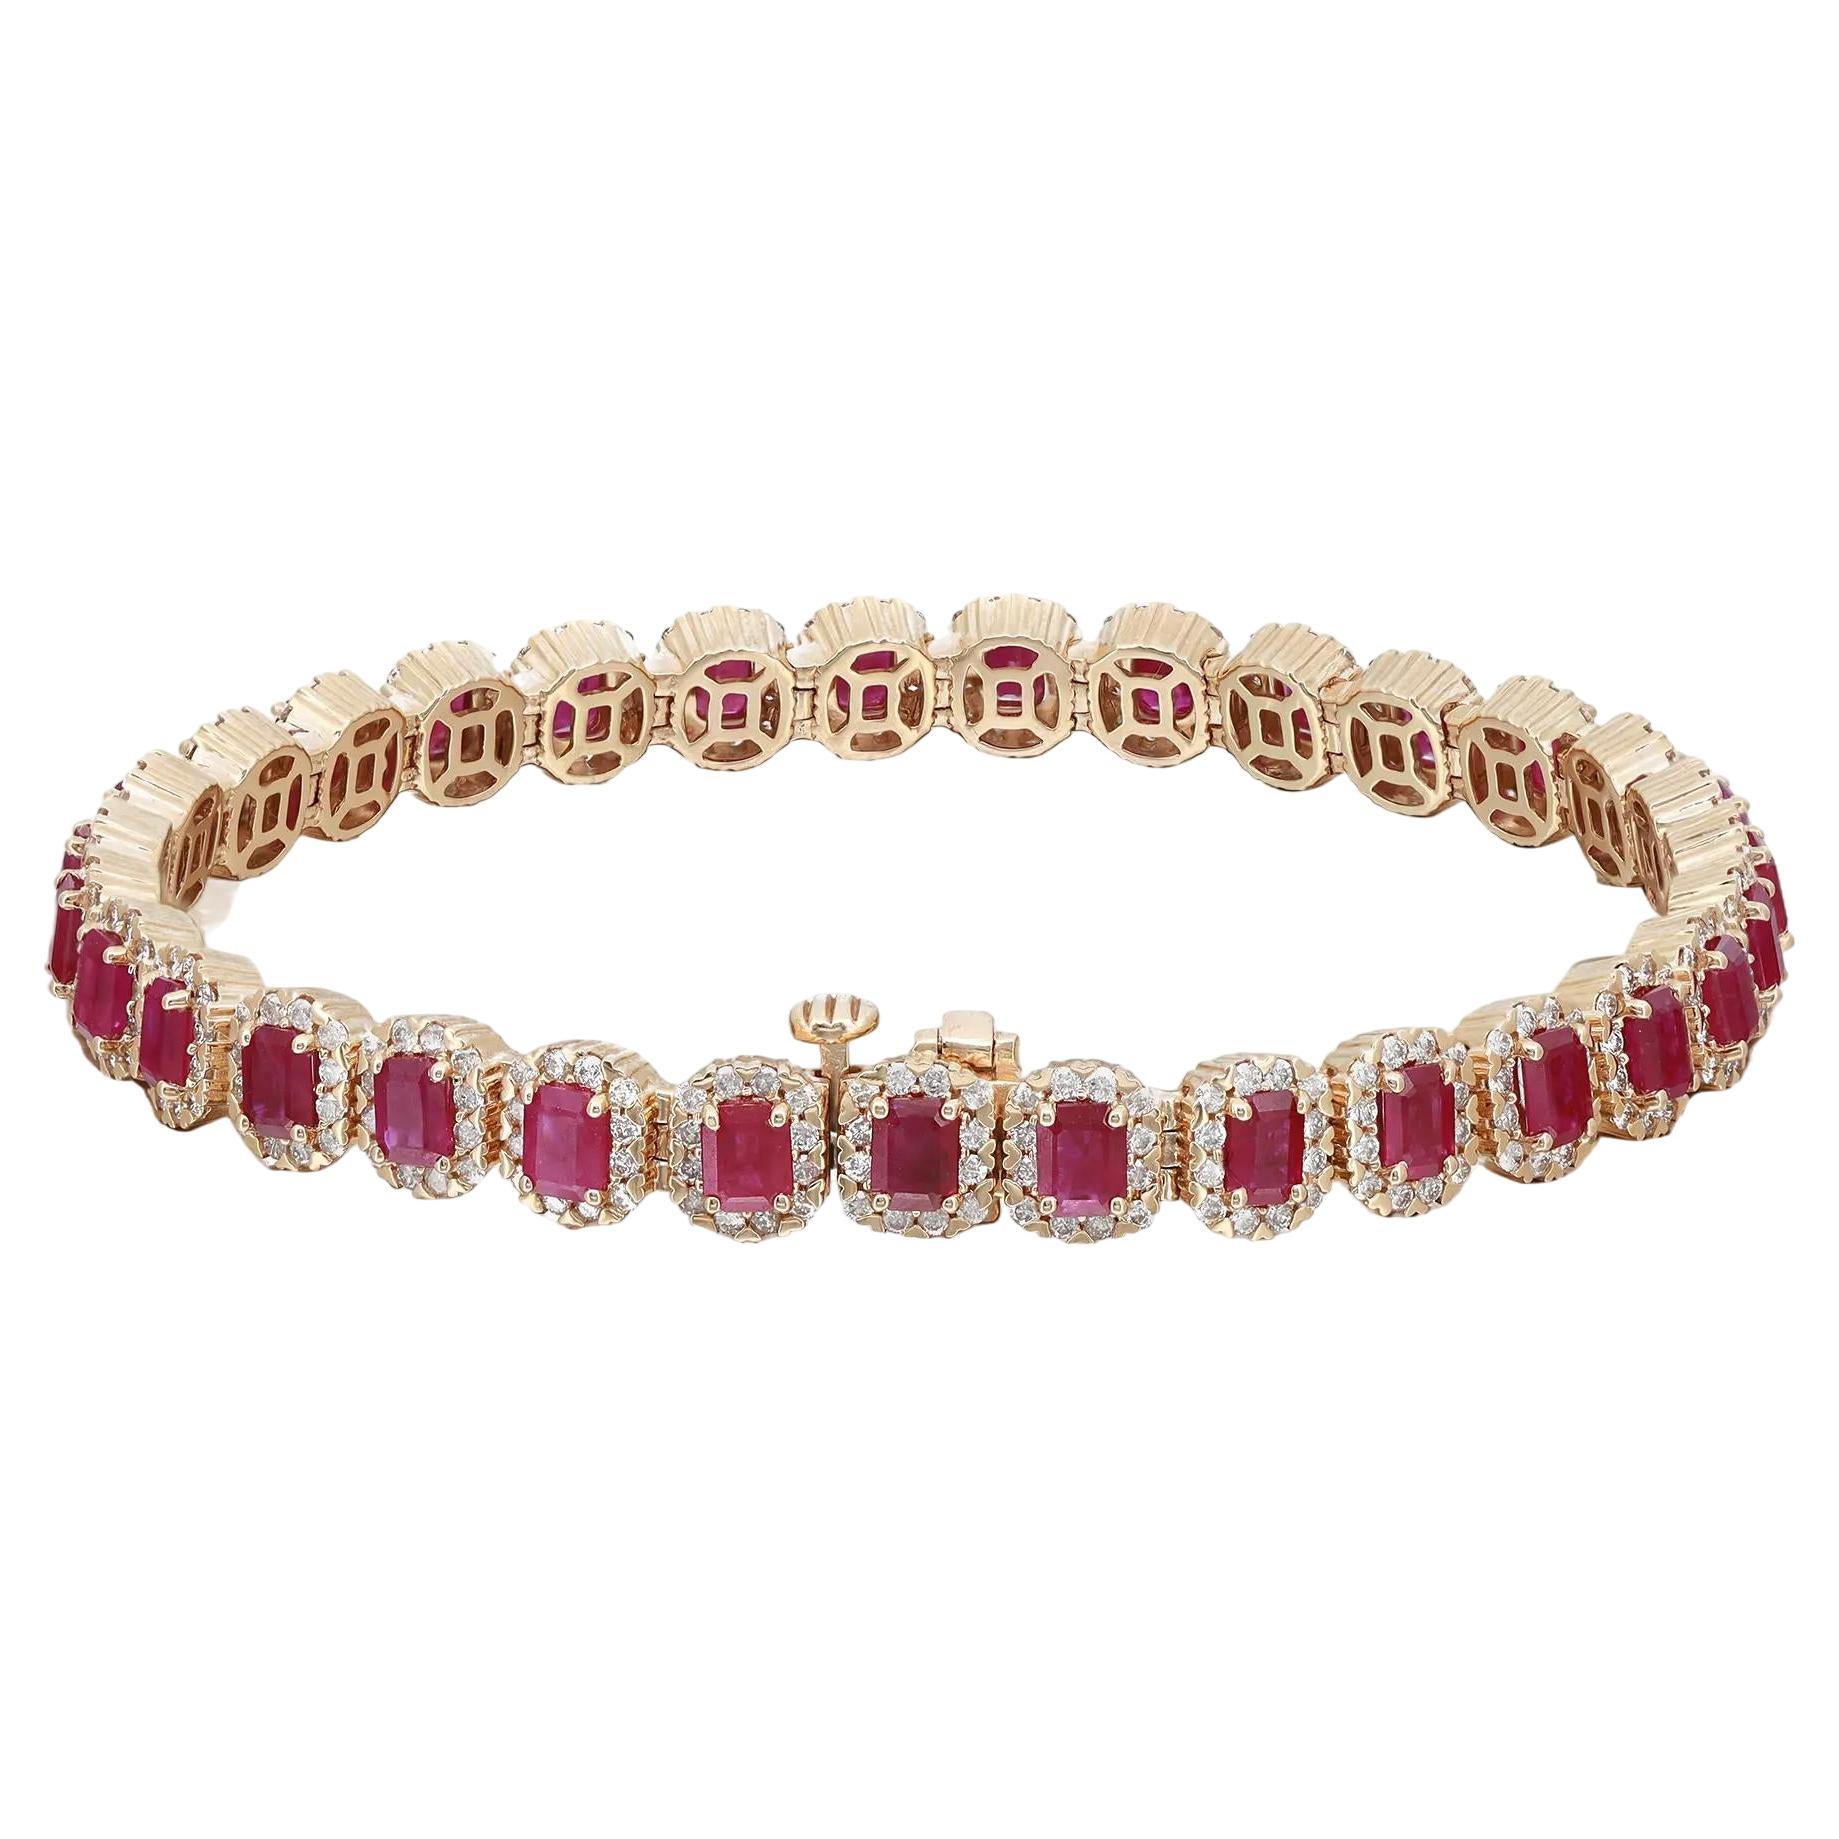 Emerald Cut Ruby and Diamond Tennis Bracelet 14K Yellow Gold 7 Inches